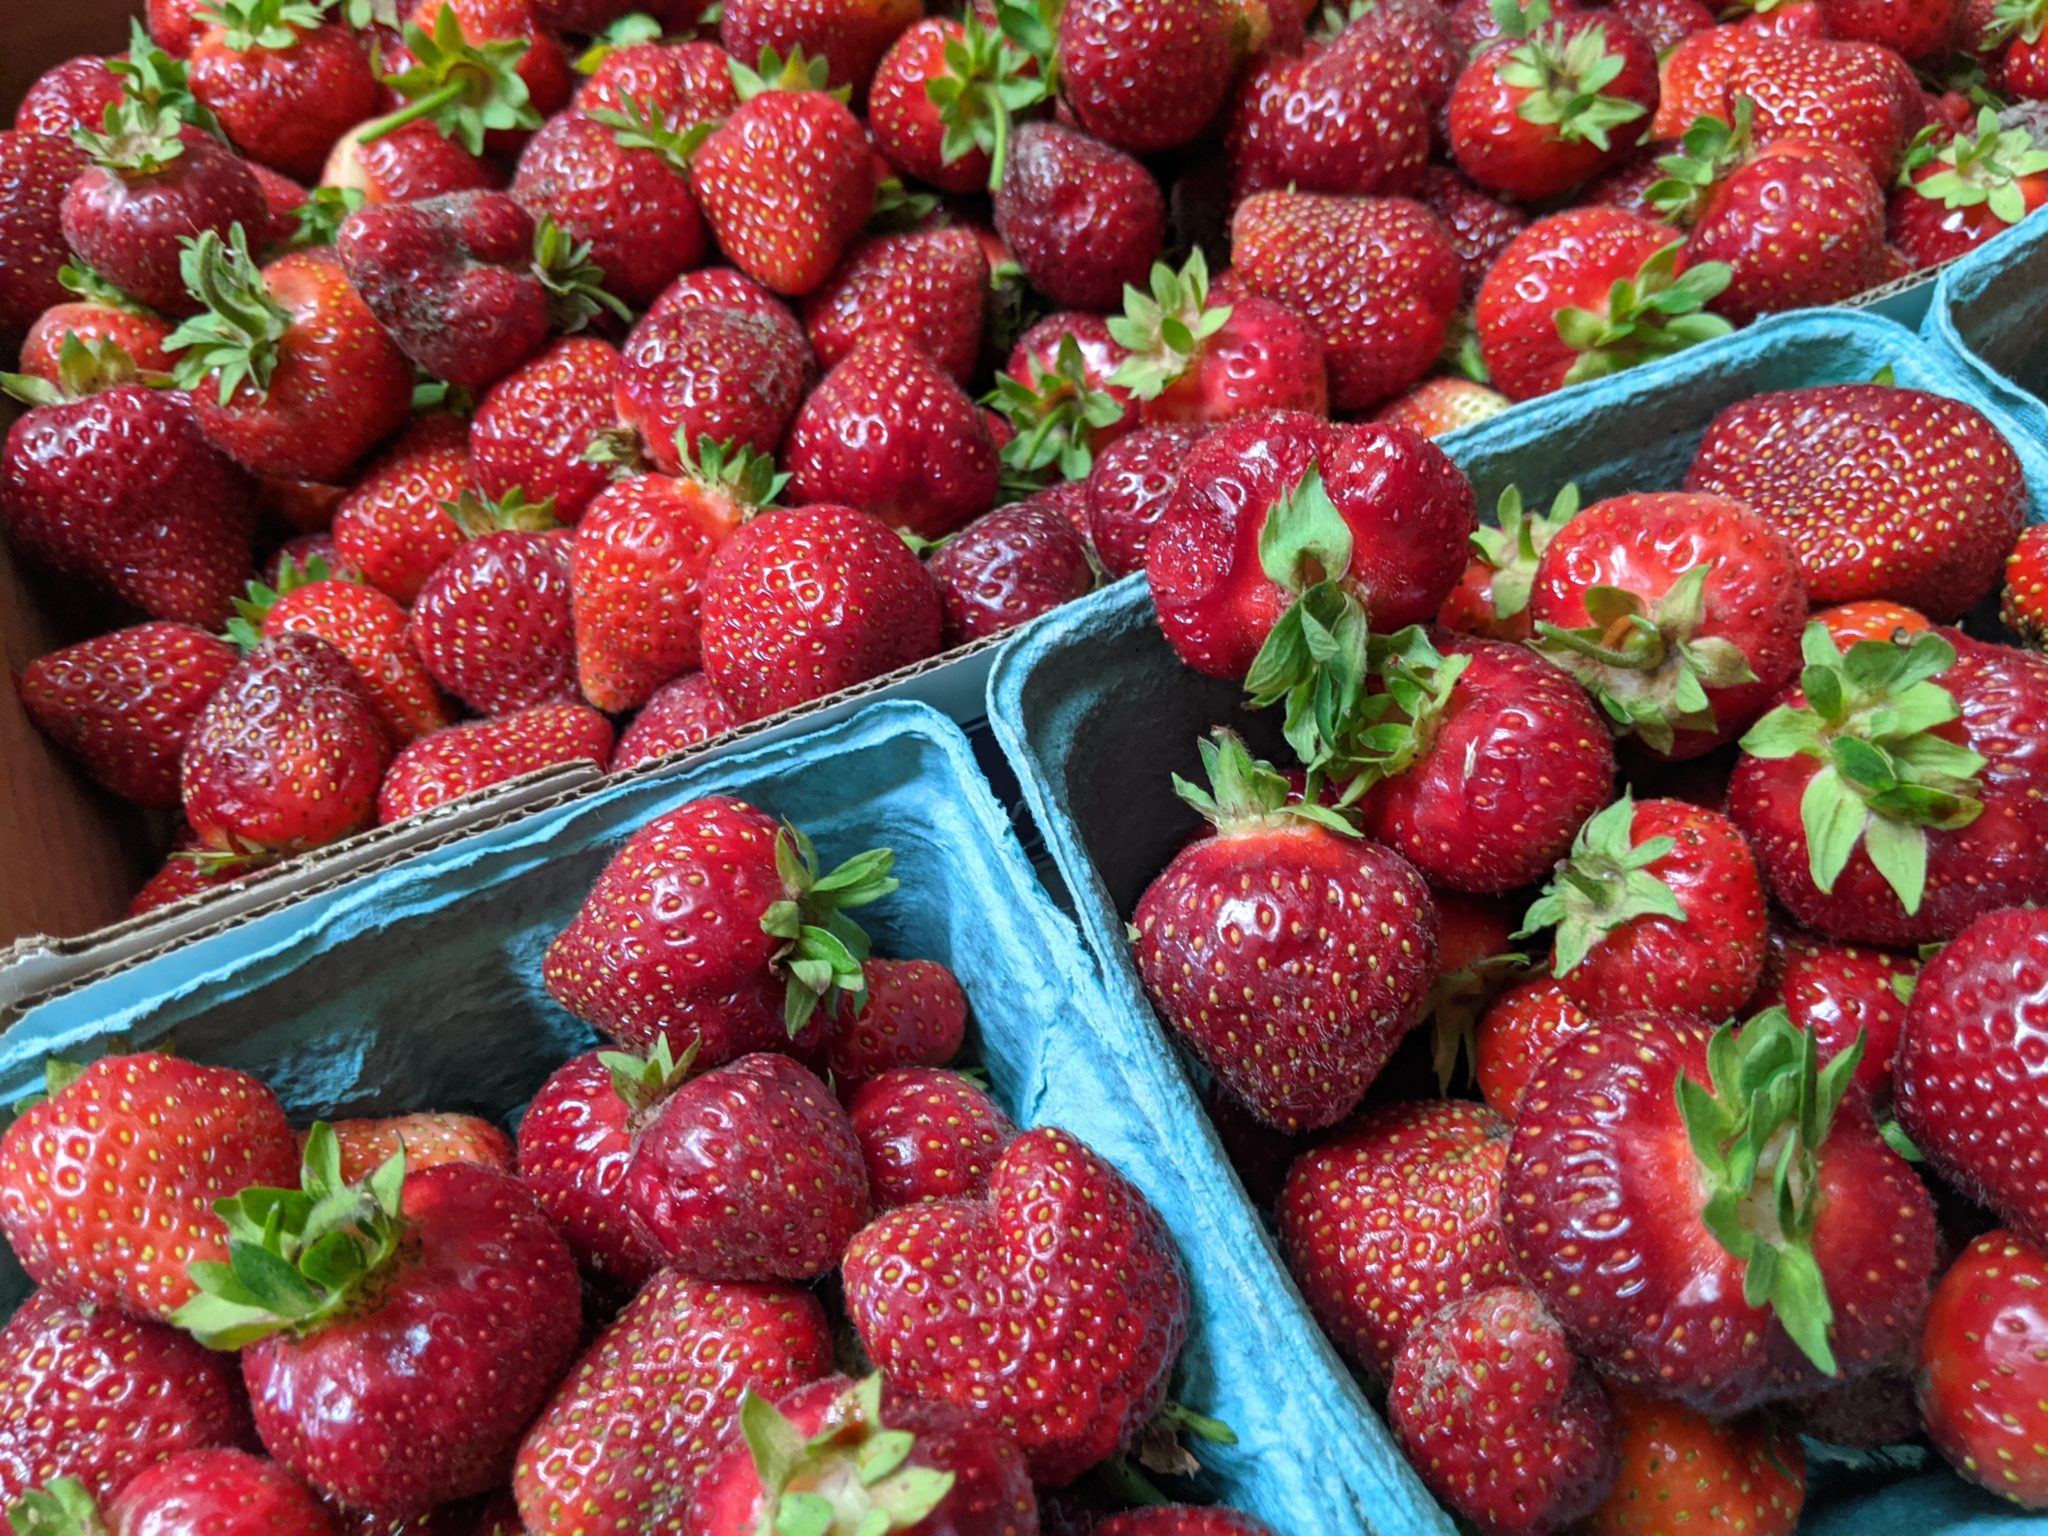 Strawberry Picking Season The Complete Guide (Updated 2020)